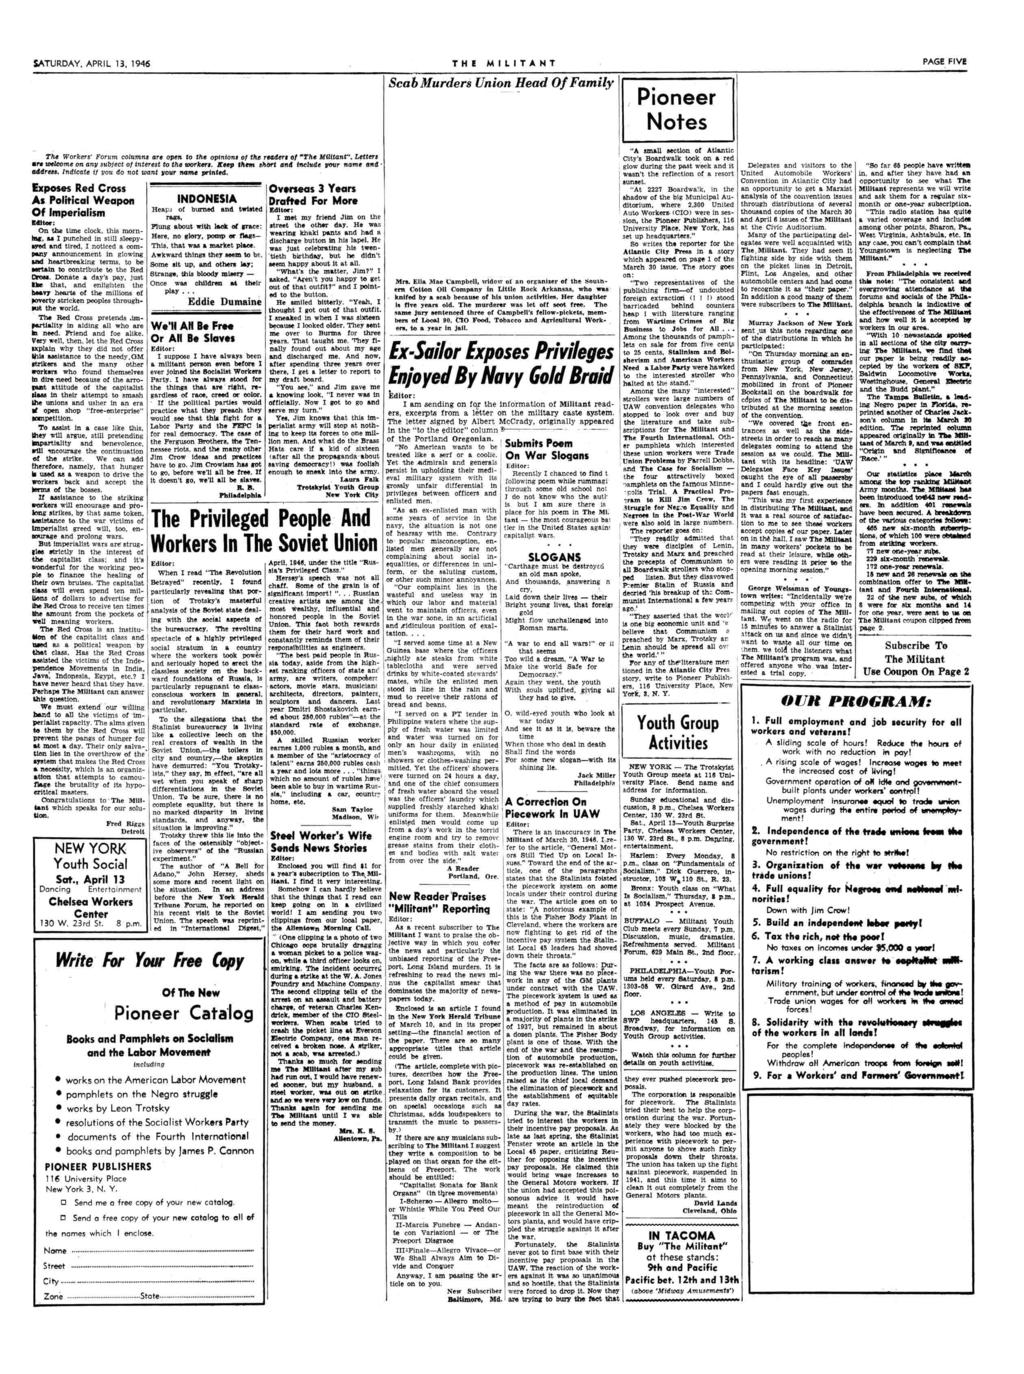 SATURDAY, APRIL 13, 1946 THE MILITANT PAGE FIVE Scab M urders Union Head O f F a m ily Pioneer Notes The Workers' Forum columns are open to the opinions of the readers of " The M ilitant.